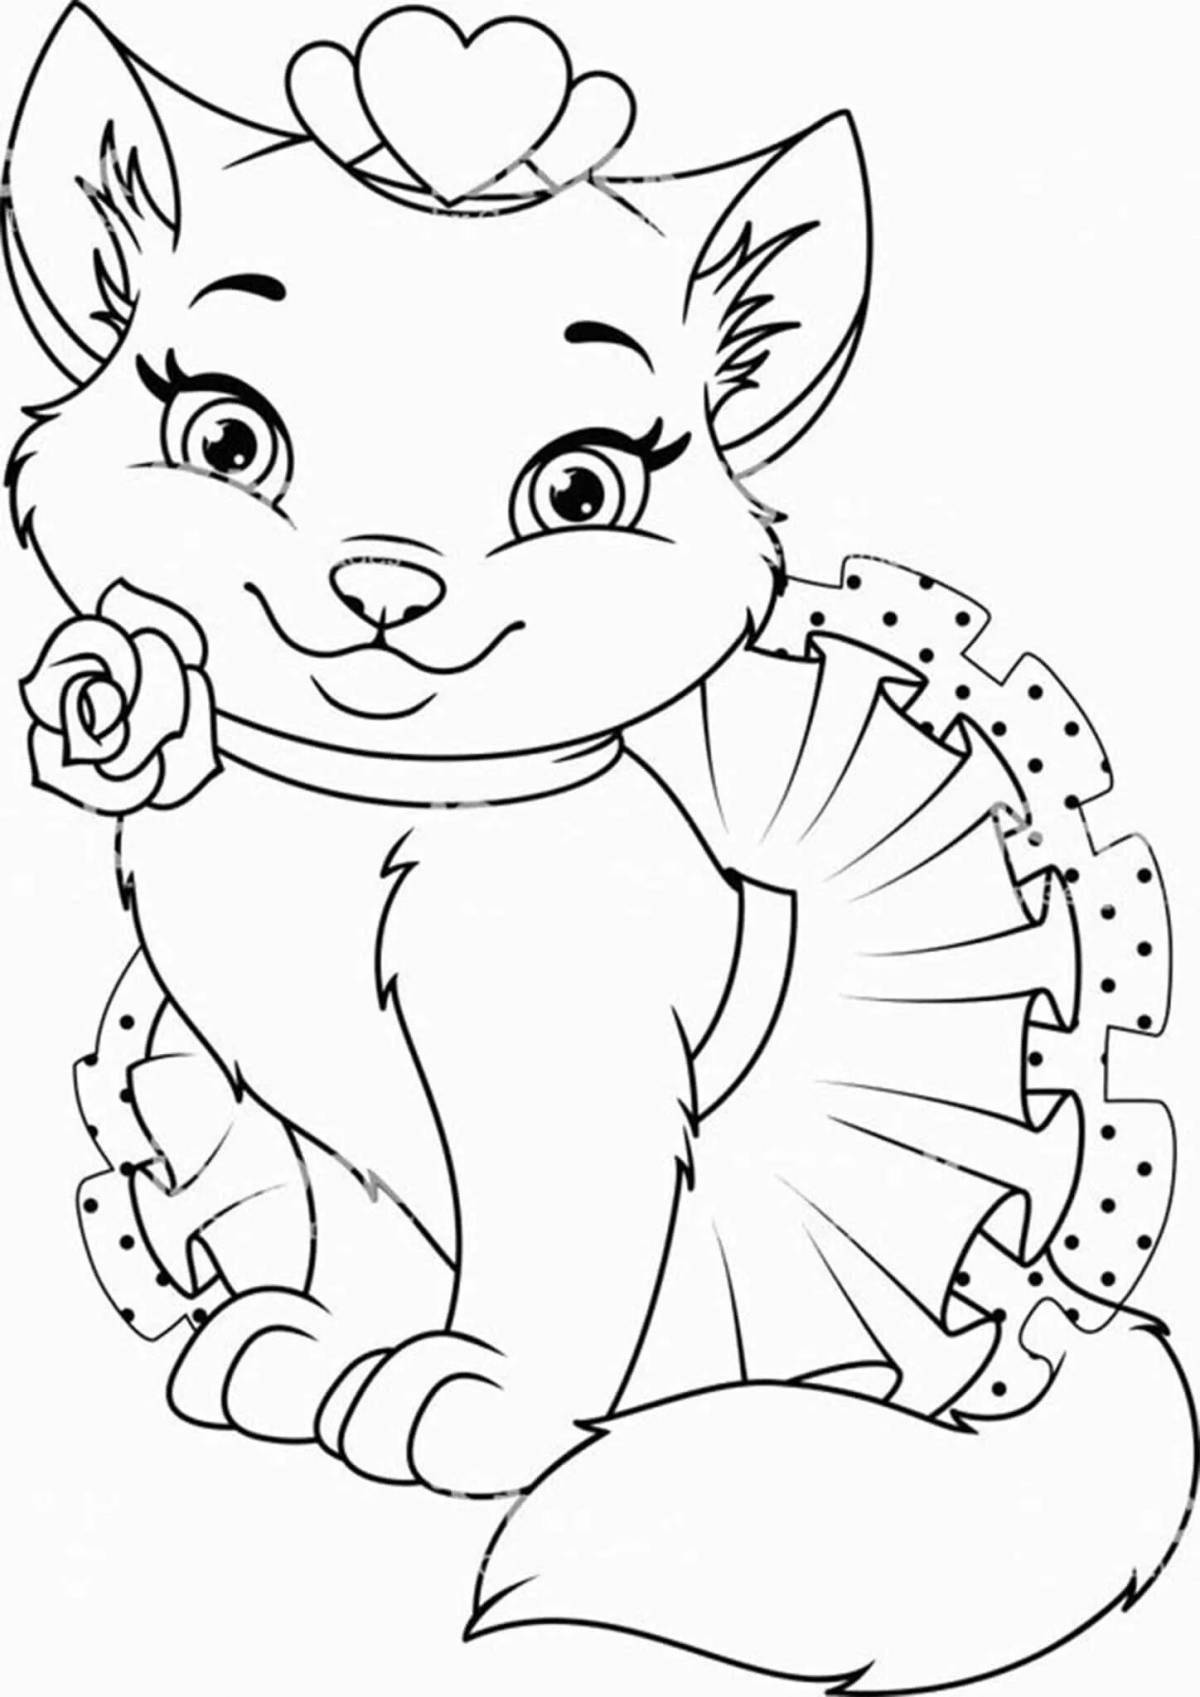 Coloring page funny kitten with a bow